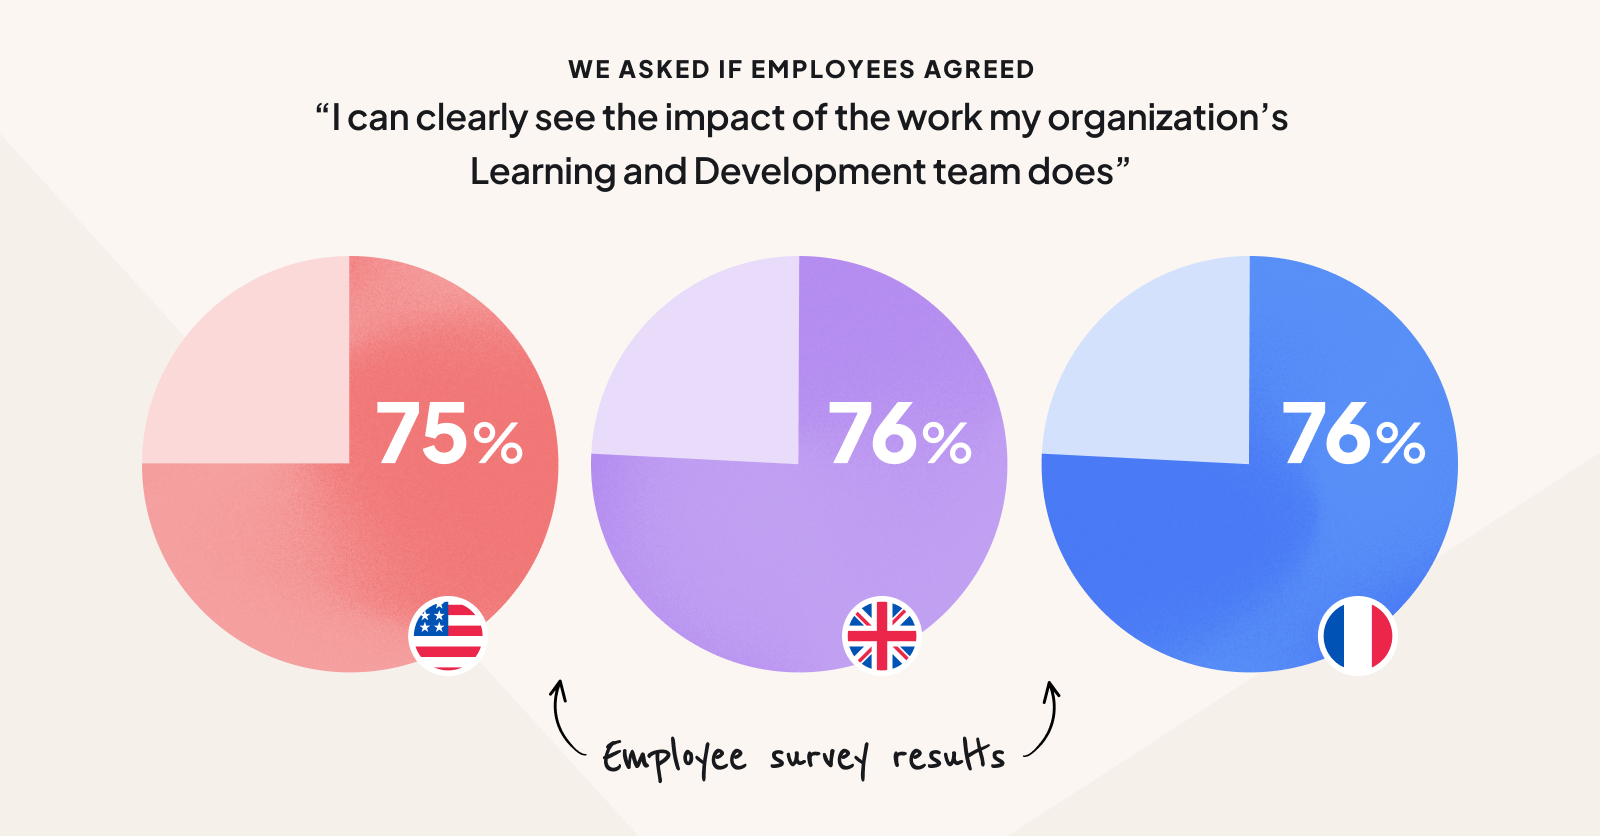 Employees see the impact of their L&D teams